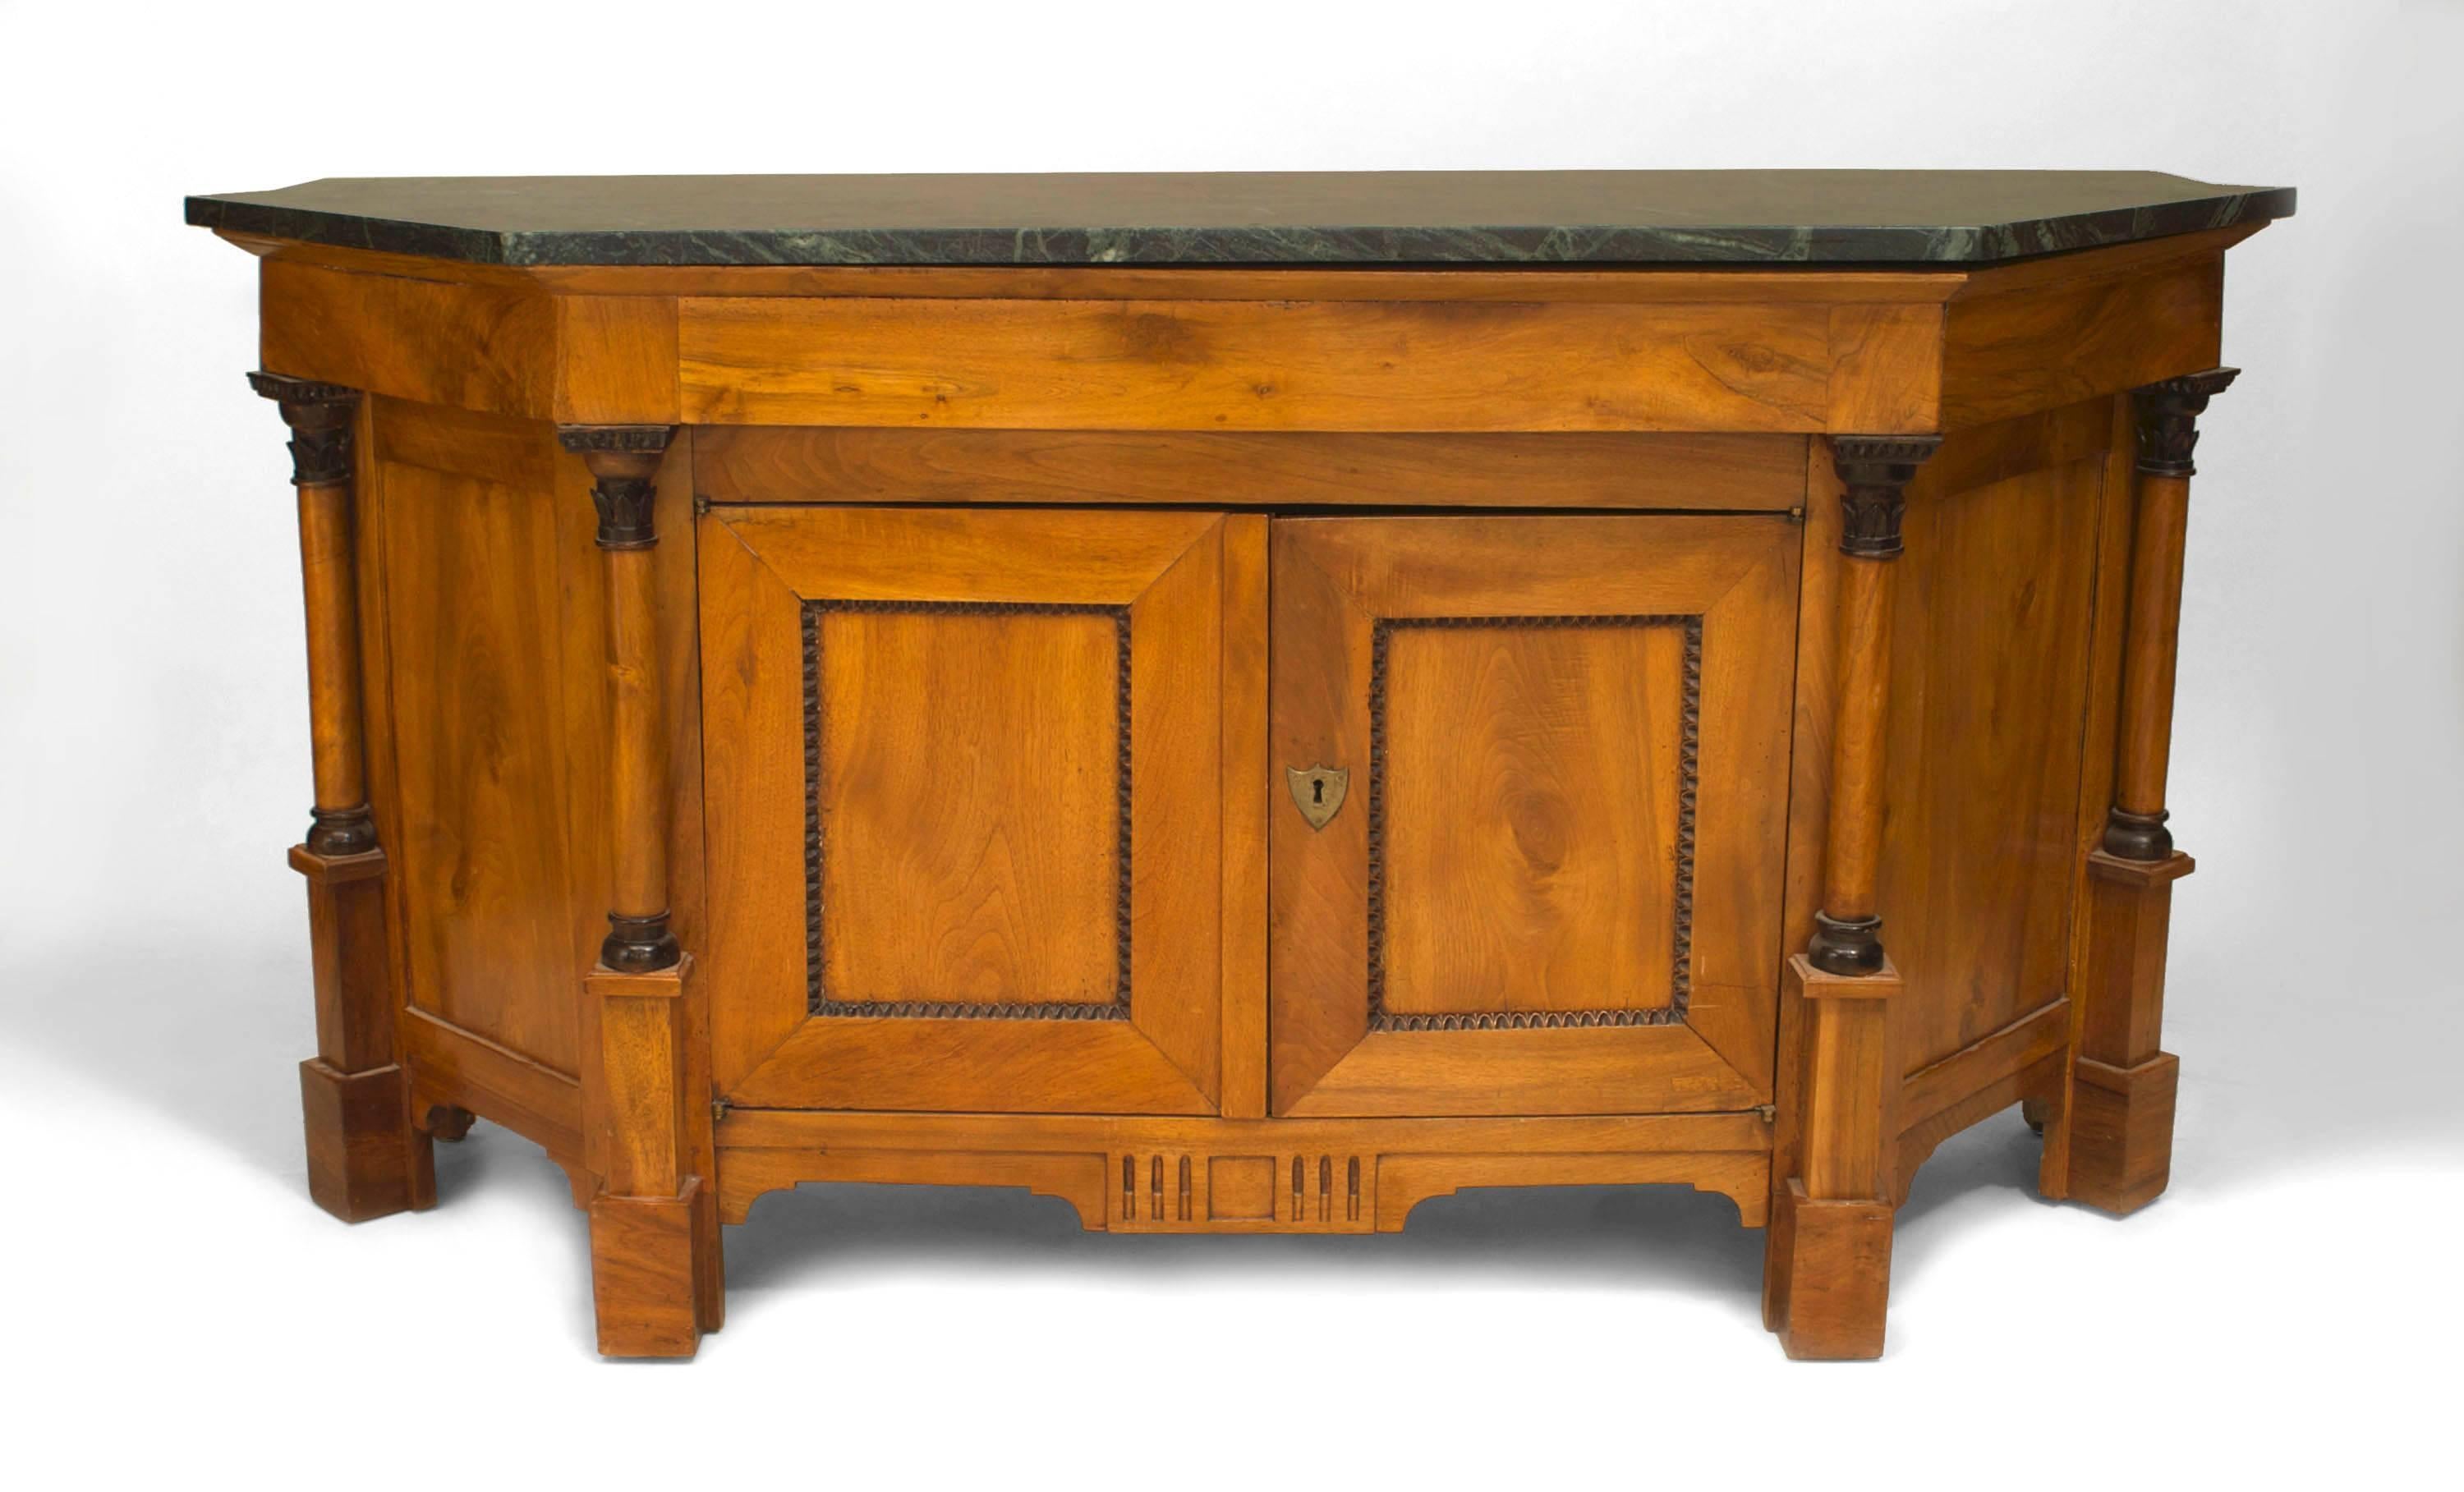 Italian Empire Neo-classic (19th Century) fruitwood sideboard cabinet with a marble top over two doors flanked by columns with canted sides.
